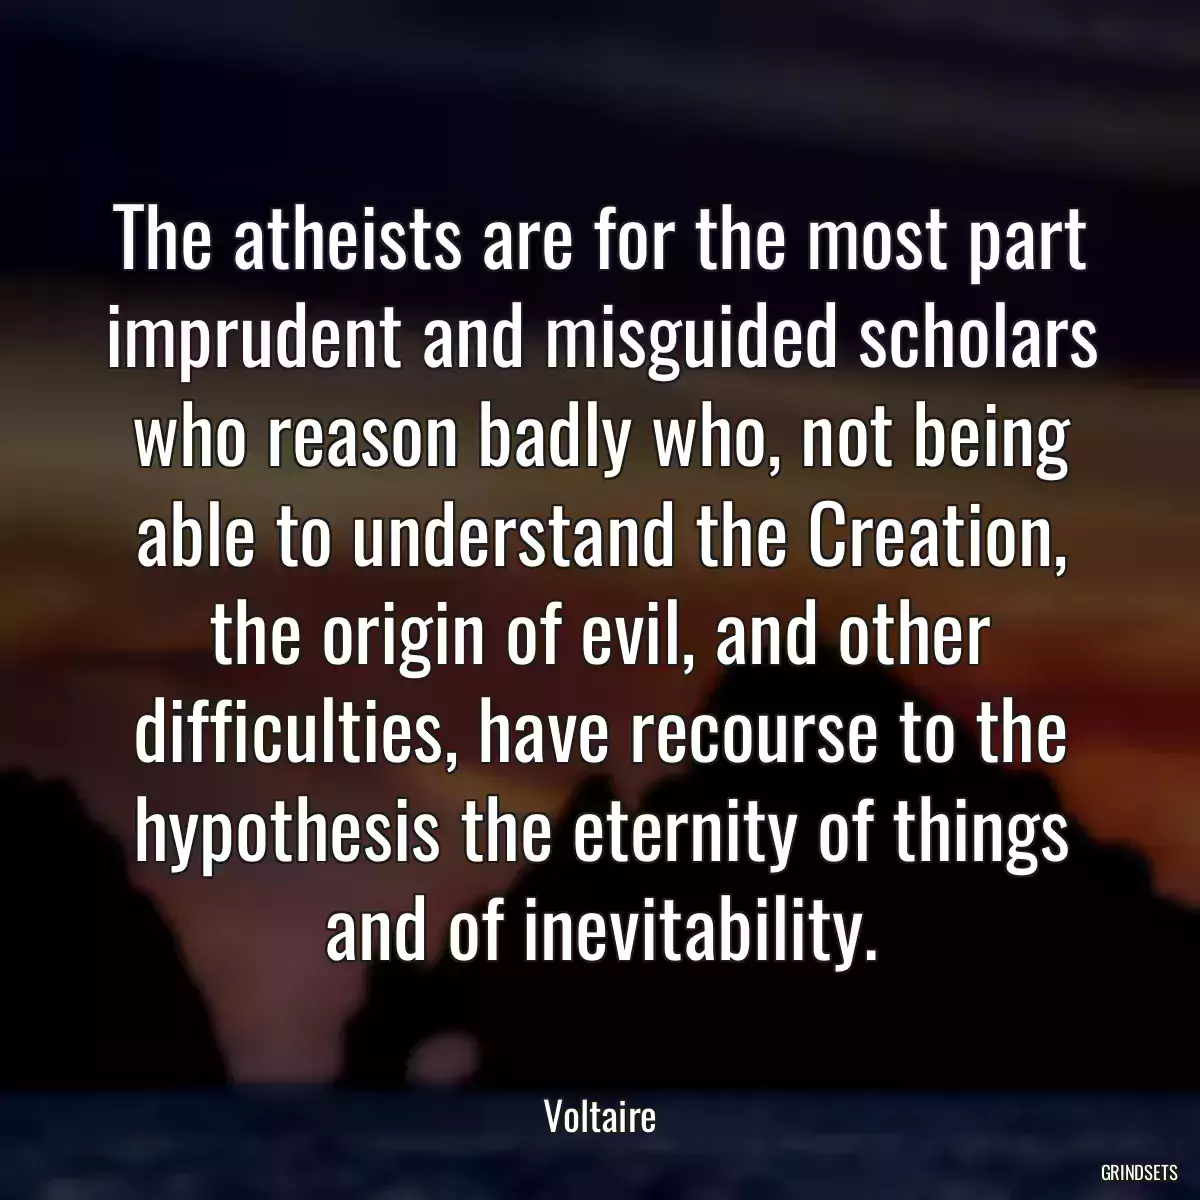 The atheists are for the most part imprudent and misguided scholars who reason badly who, not being able to understand the Creation, the origin of evil, and other difficulties, have recourse to the hypothesis the eternity of things and of inevitability.